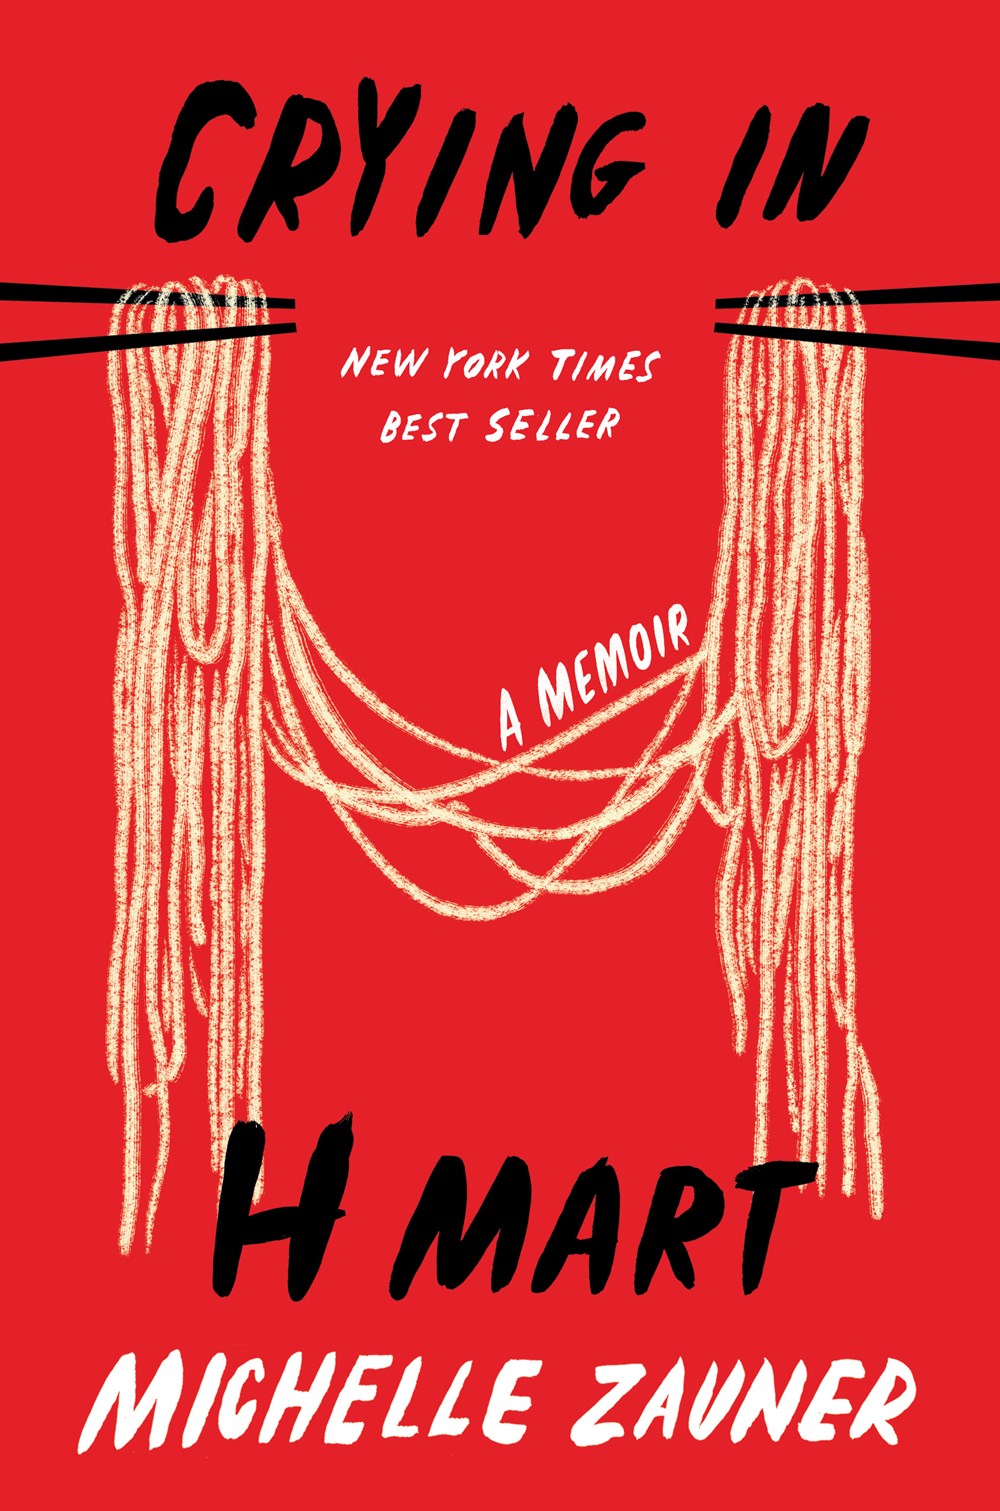 Will Sharpe To Direct Adaptation of Michelle Zauner’s ‘Crying in H Mart’ | Book Pulse